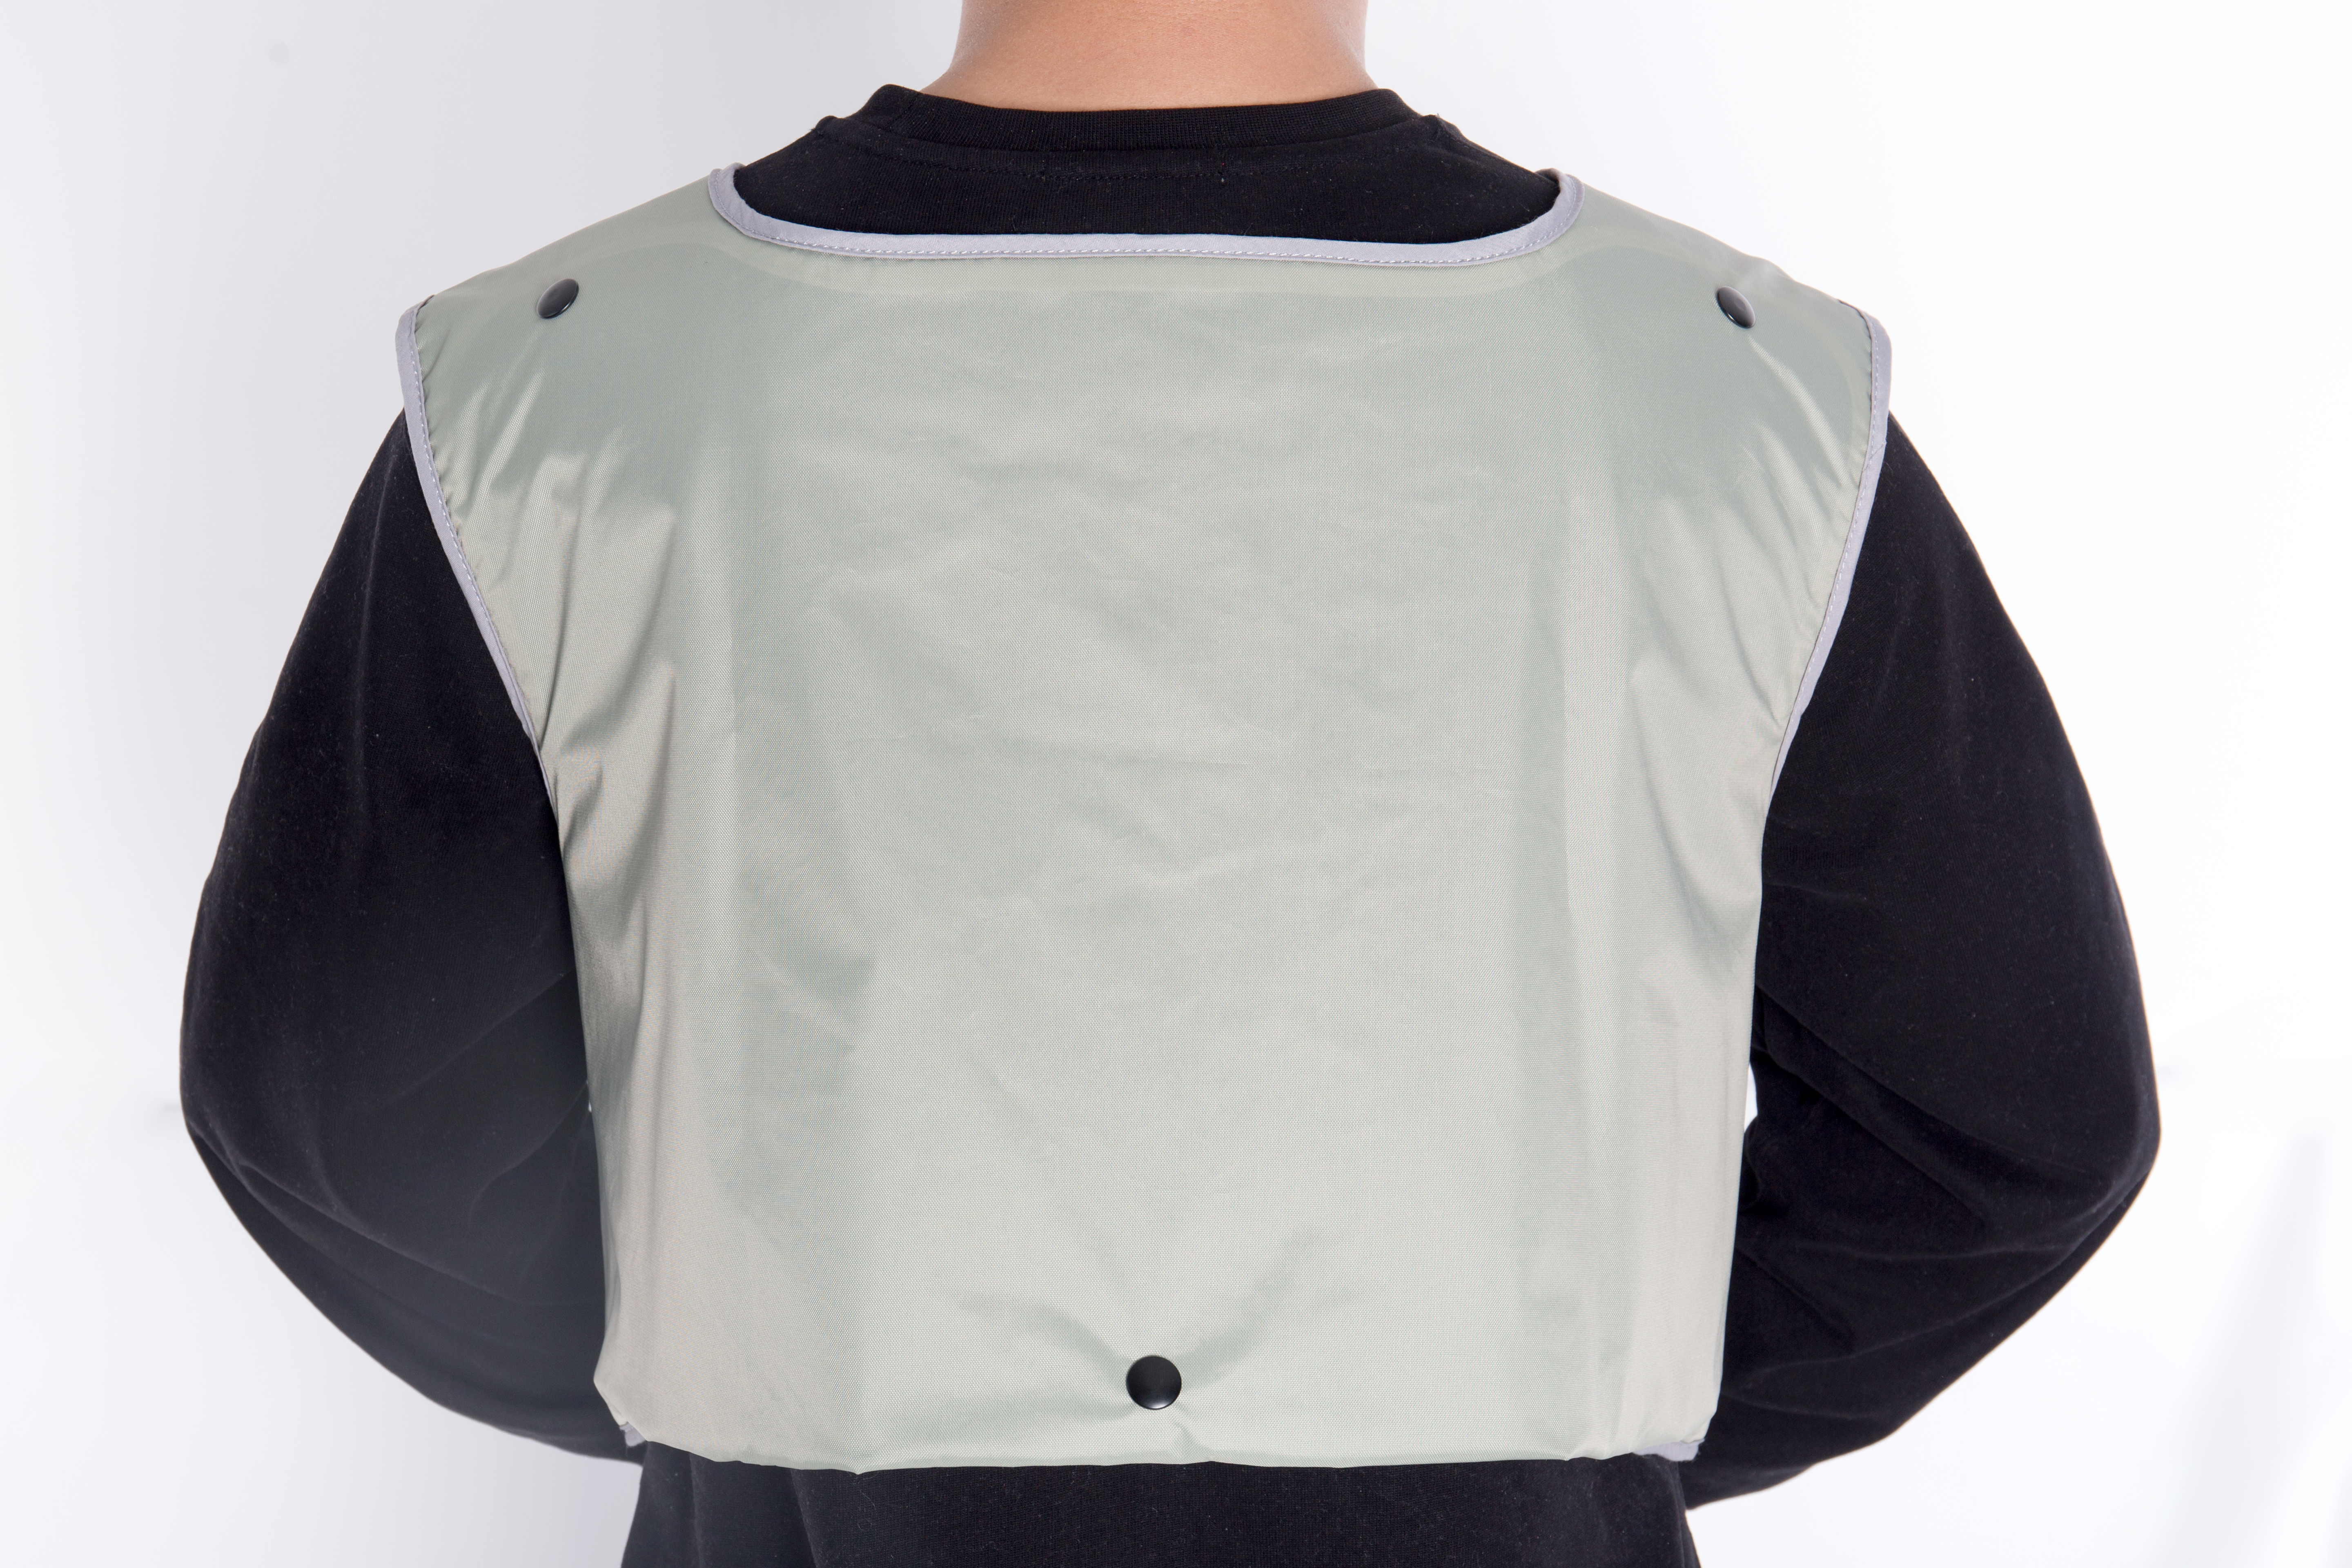 Percussion Vest For Lungs